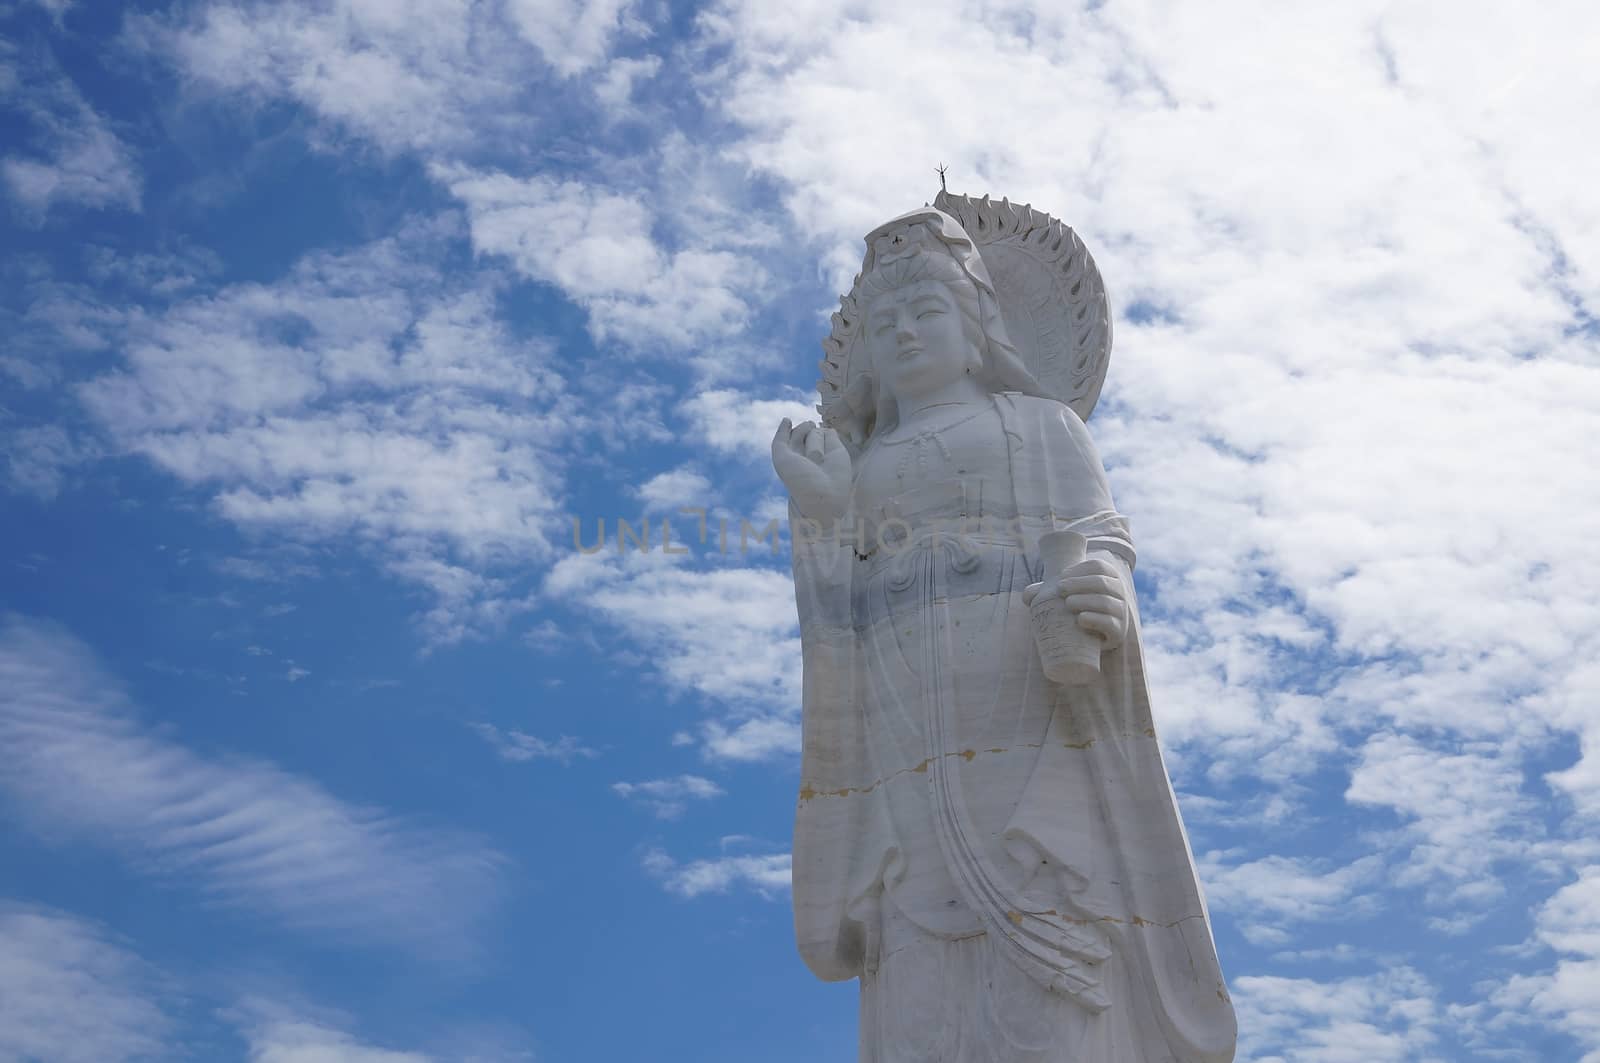 Hat Yai, Thailand -  13 Sept, 15 : The 20 metres high white jade statue of  Kuan Yin,  Goddess of  Compassion & Mercy is located on top of a hill at Hat Yai Municipal Park. It is about 1000 steps to the hilltop where there is 360 degree panoramic view of Hat Yai City and Songkhla.